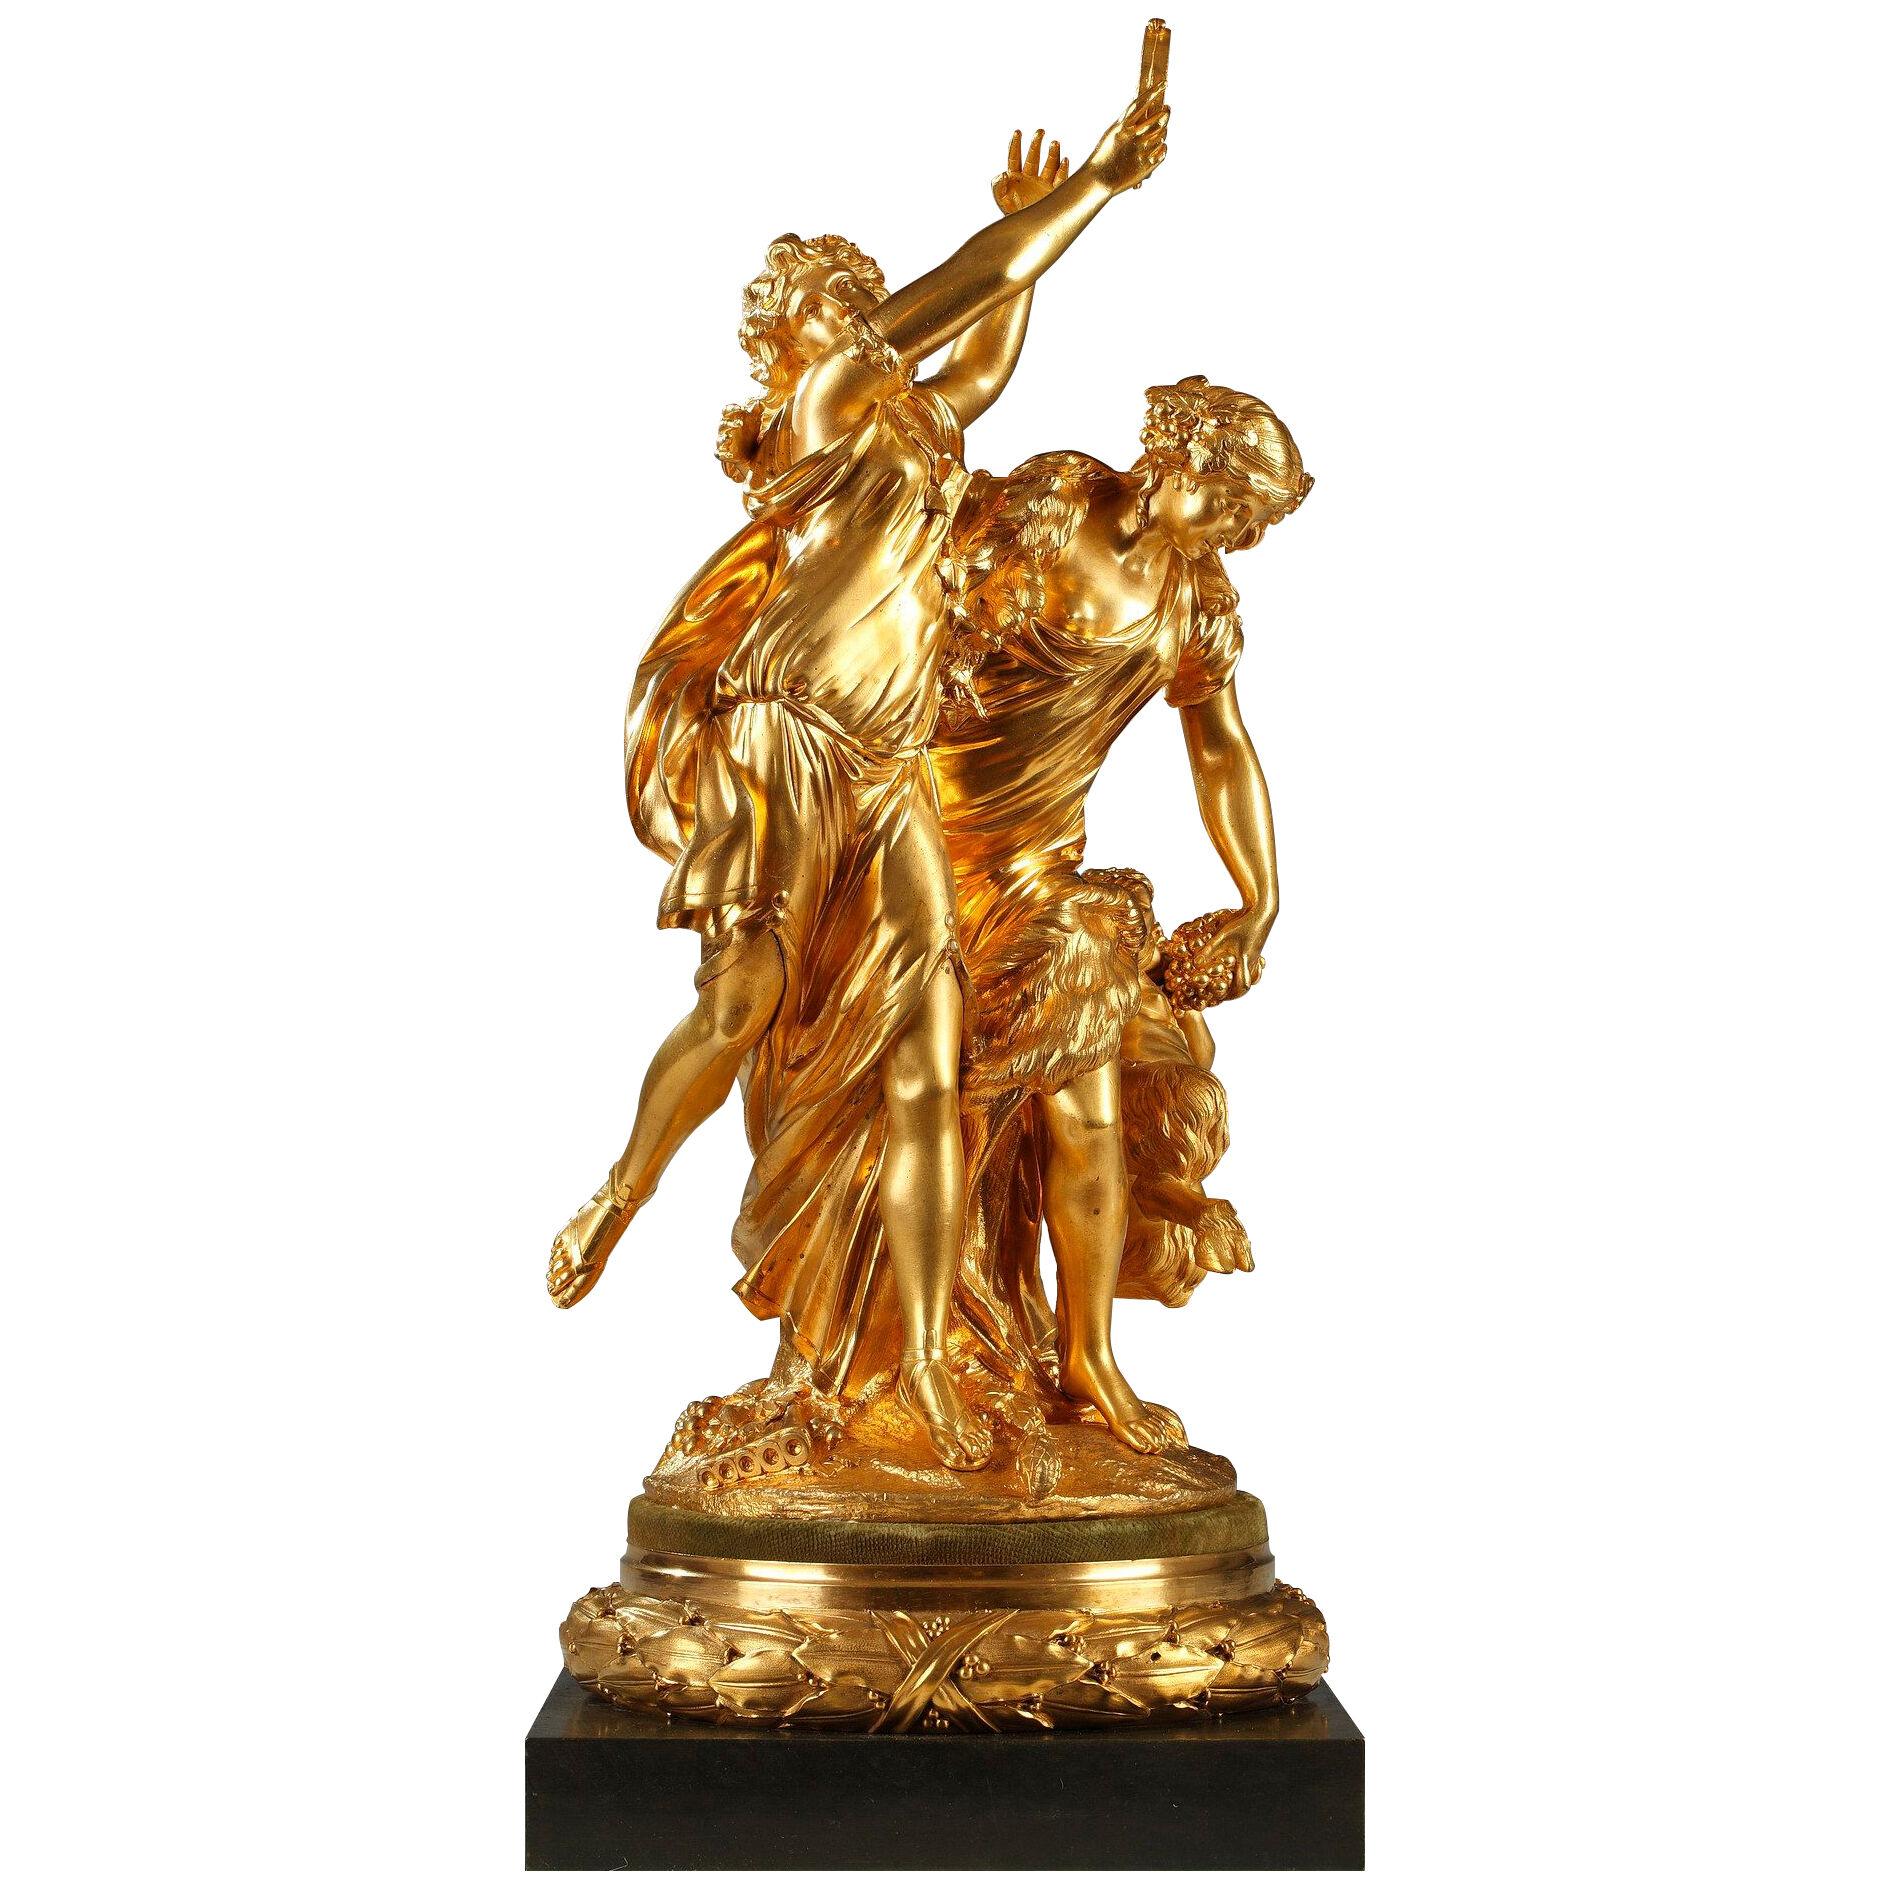 Gilded Bronze "Bacchanal" Group After Clodion, France, Circa 1880